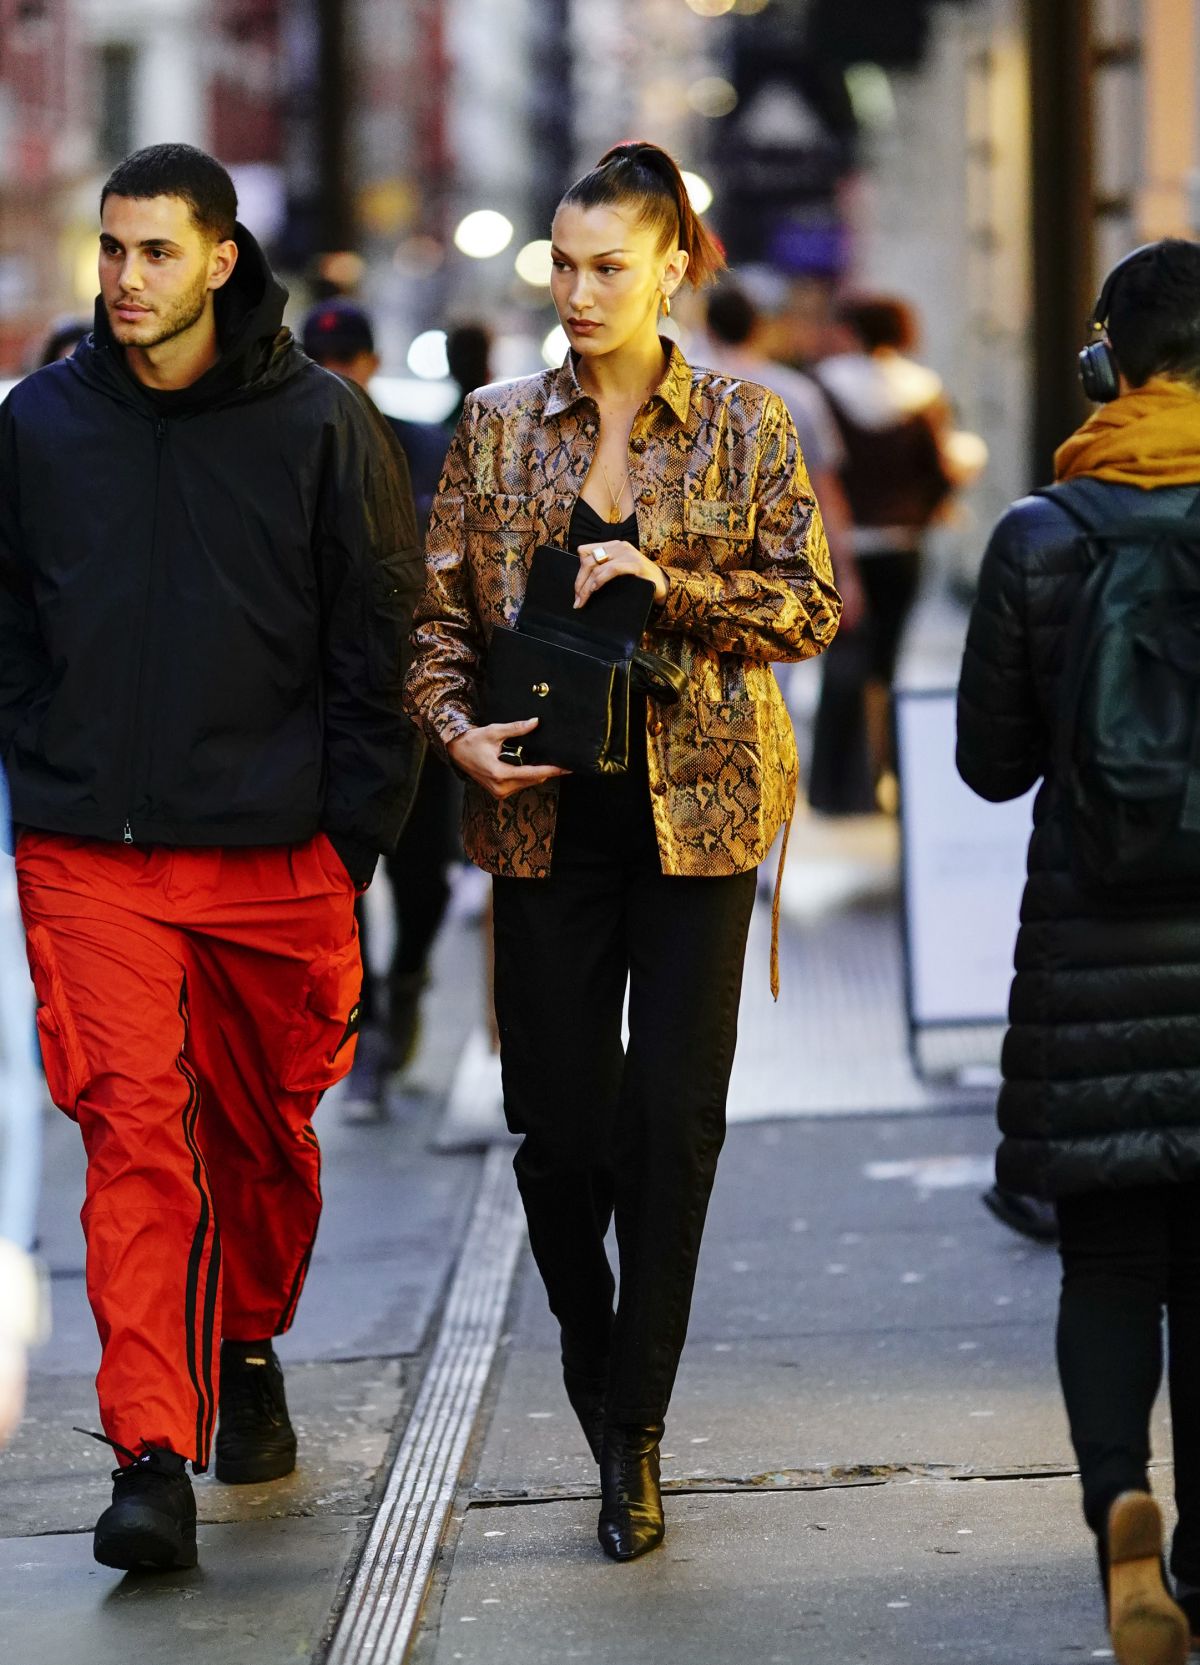 BELLA HADID in a Snakeskin Jacket Out in New York 01/12/2020 – HawtCelebs